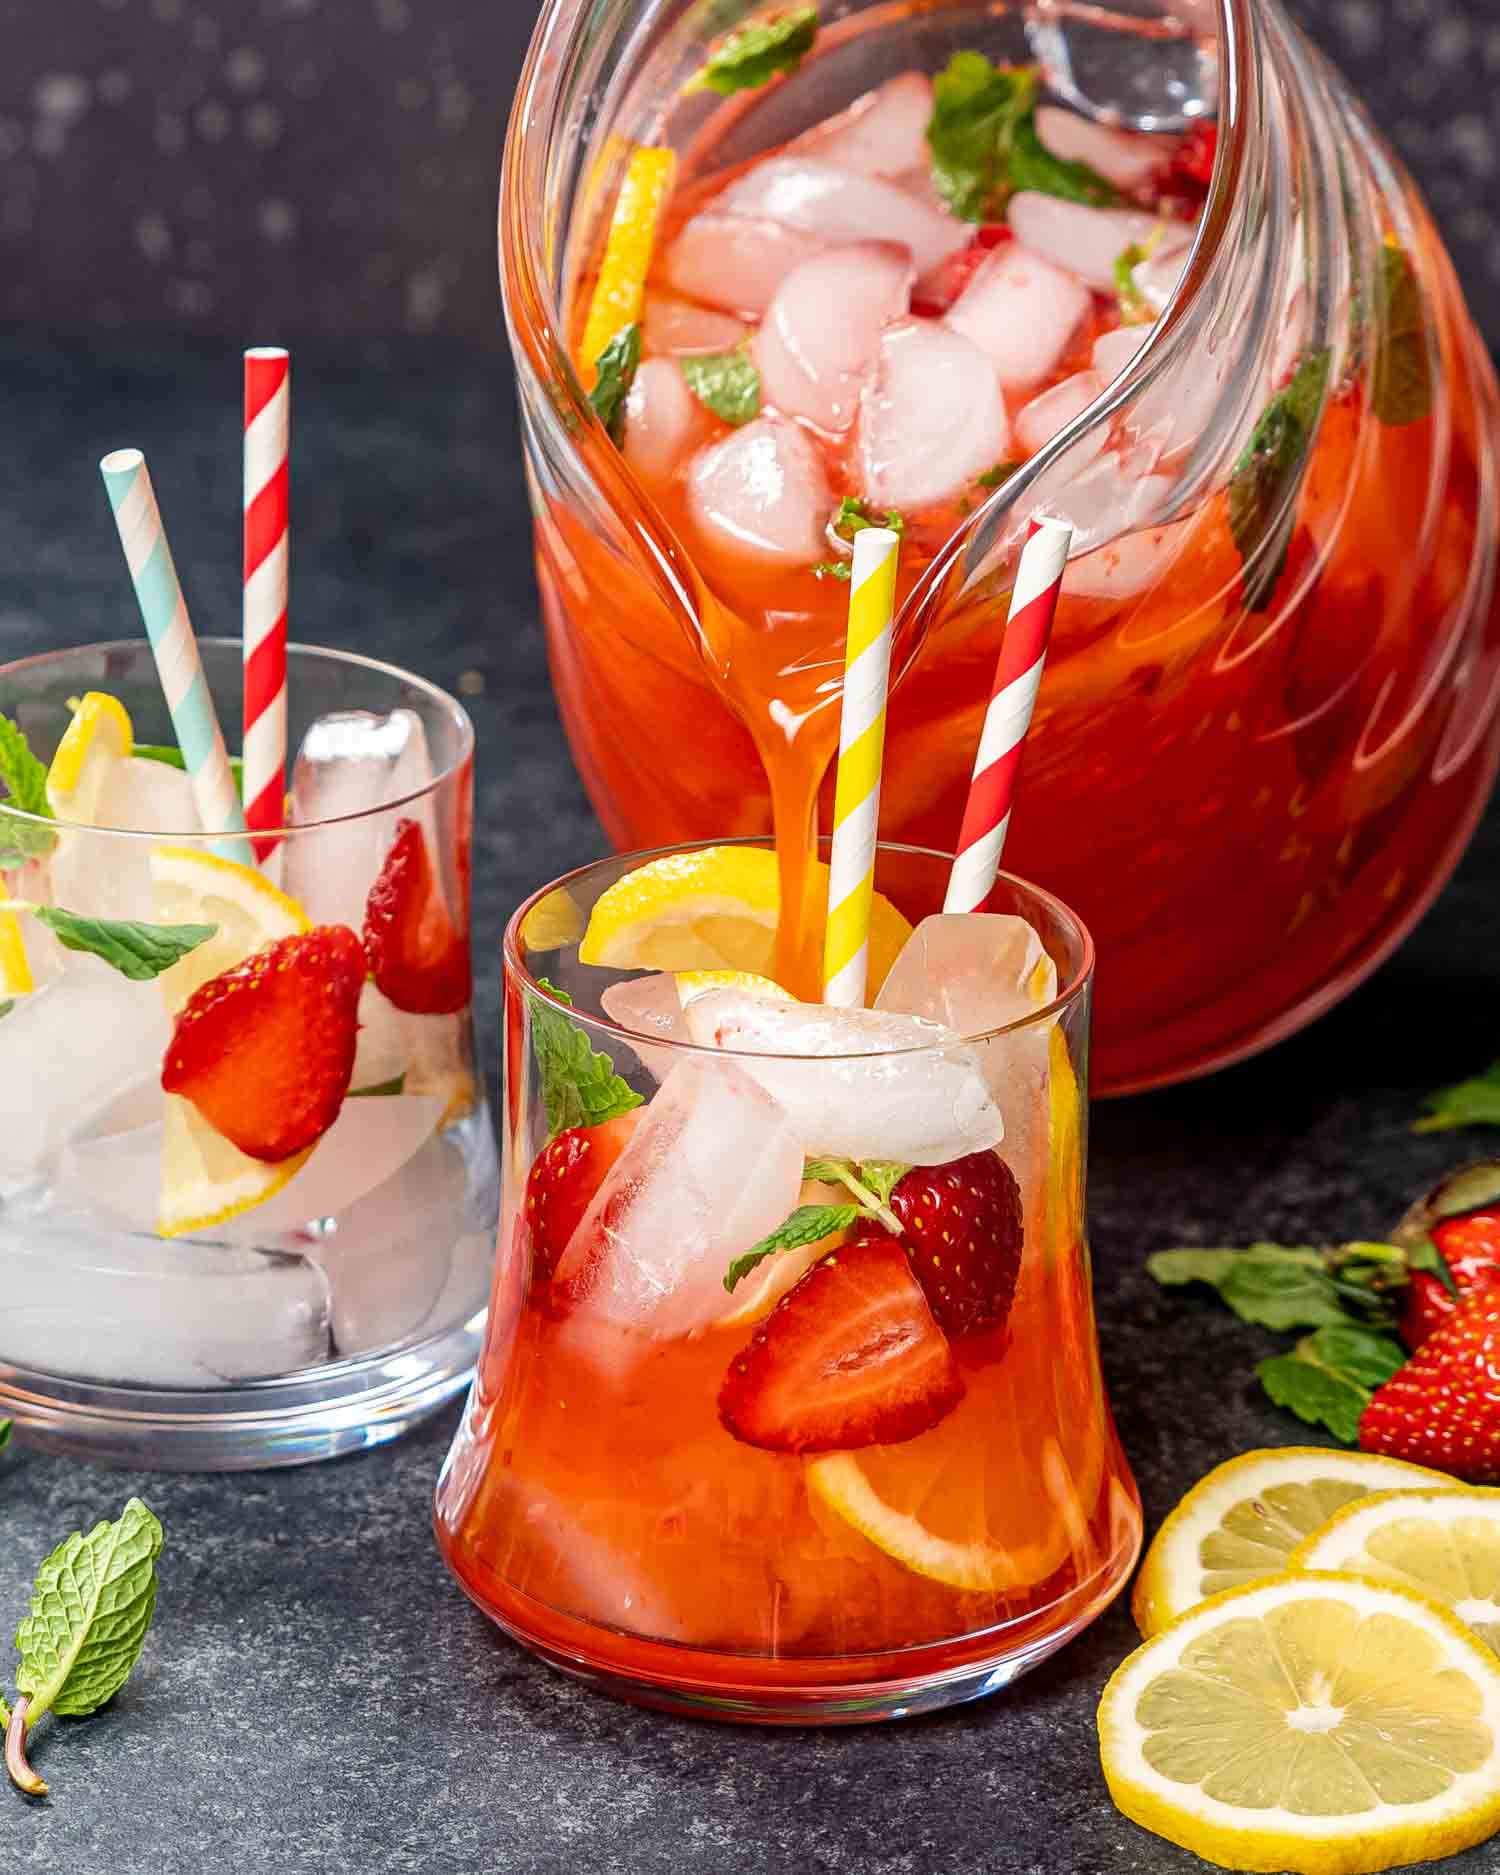 two glasses filled with strawberry lemonade garnished with lemon slices and strawberries.